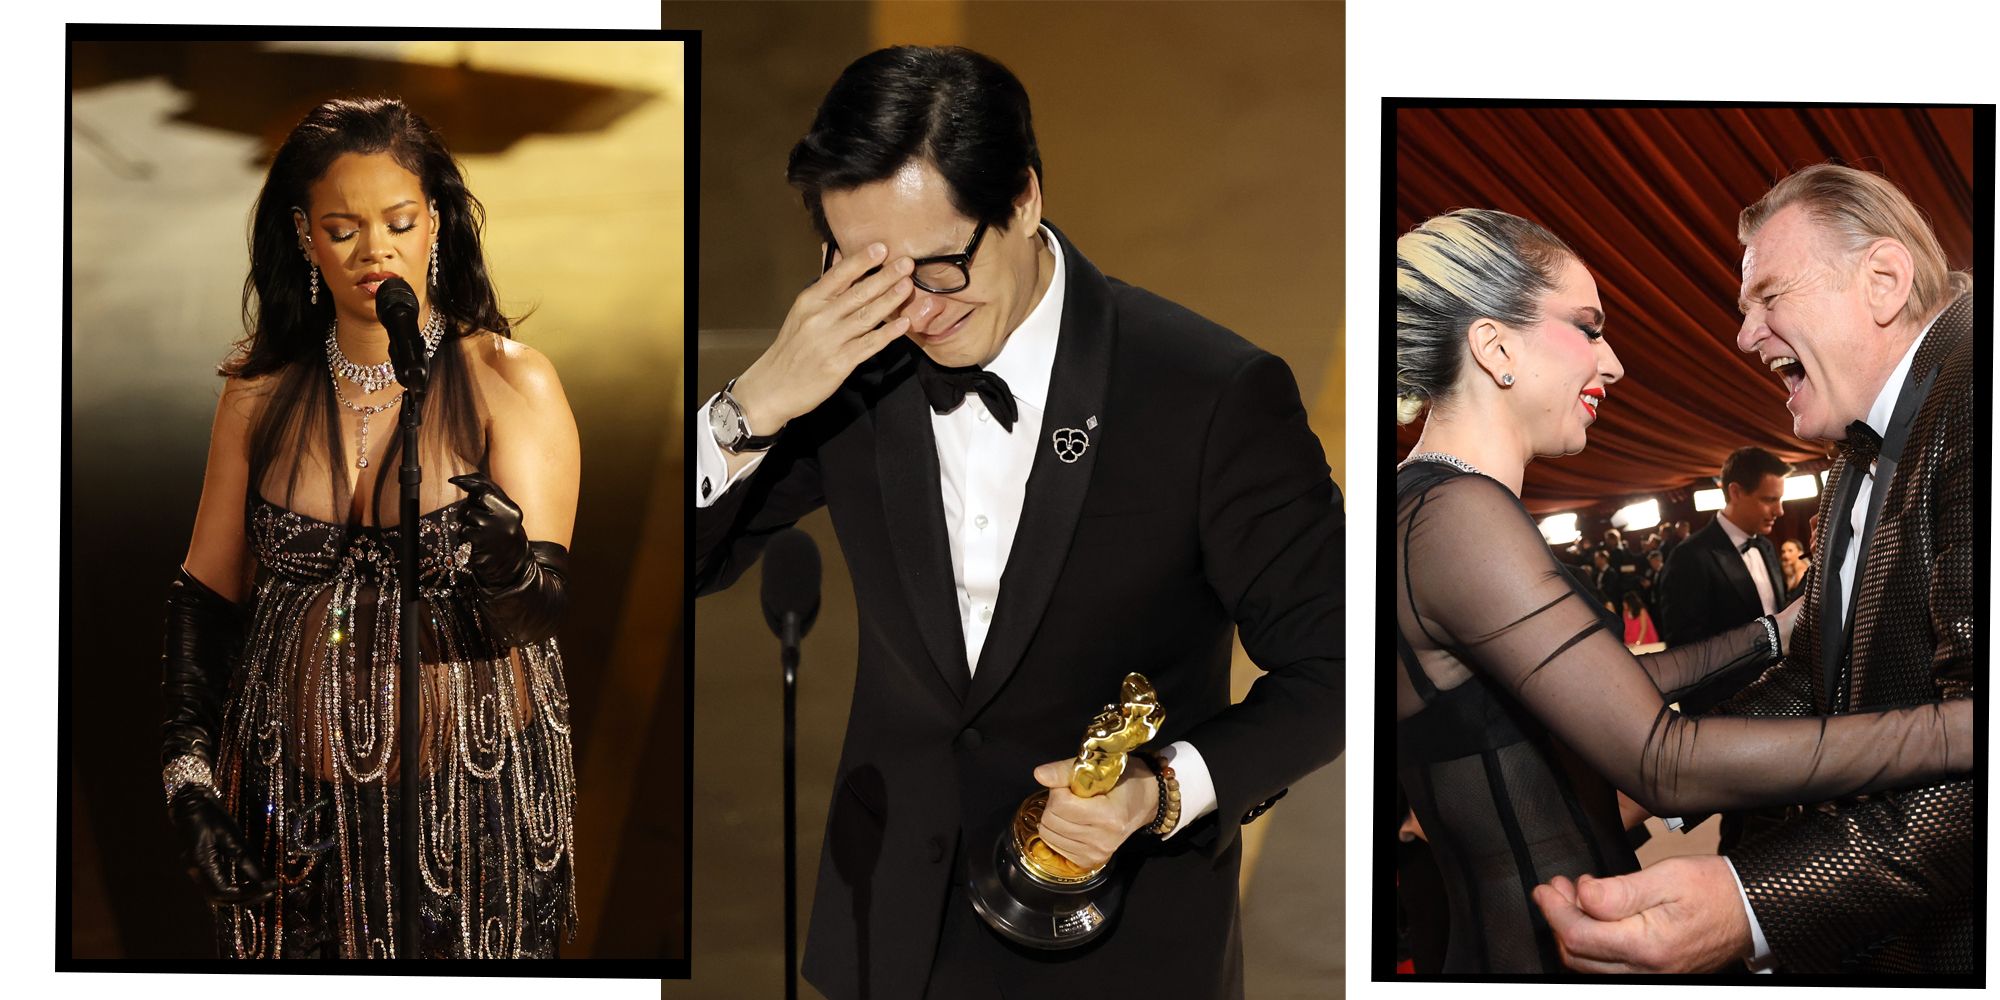 Oscars 2023: Top 5 Oops Moment At The Academy Awards Through The Ages